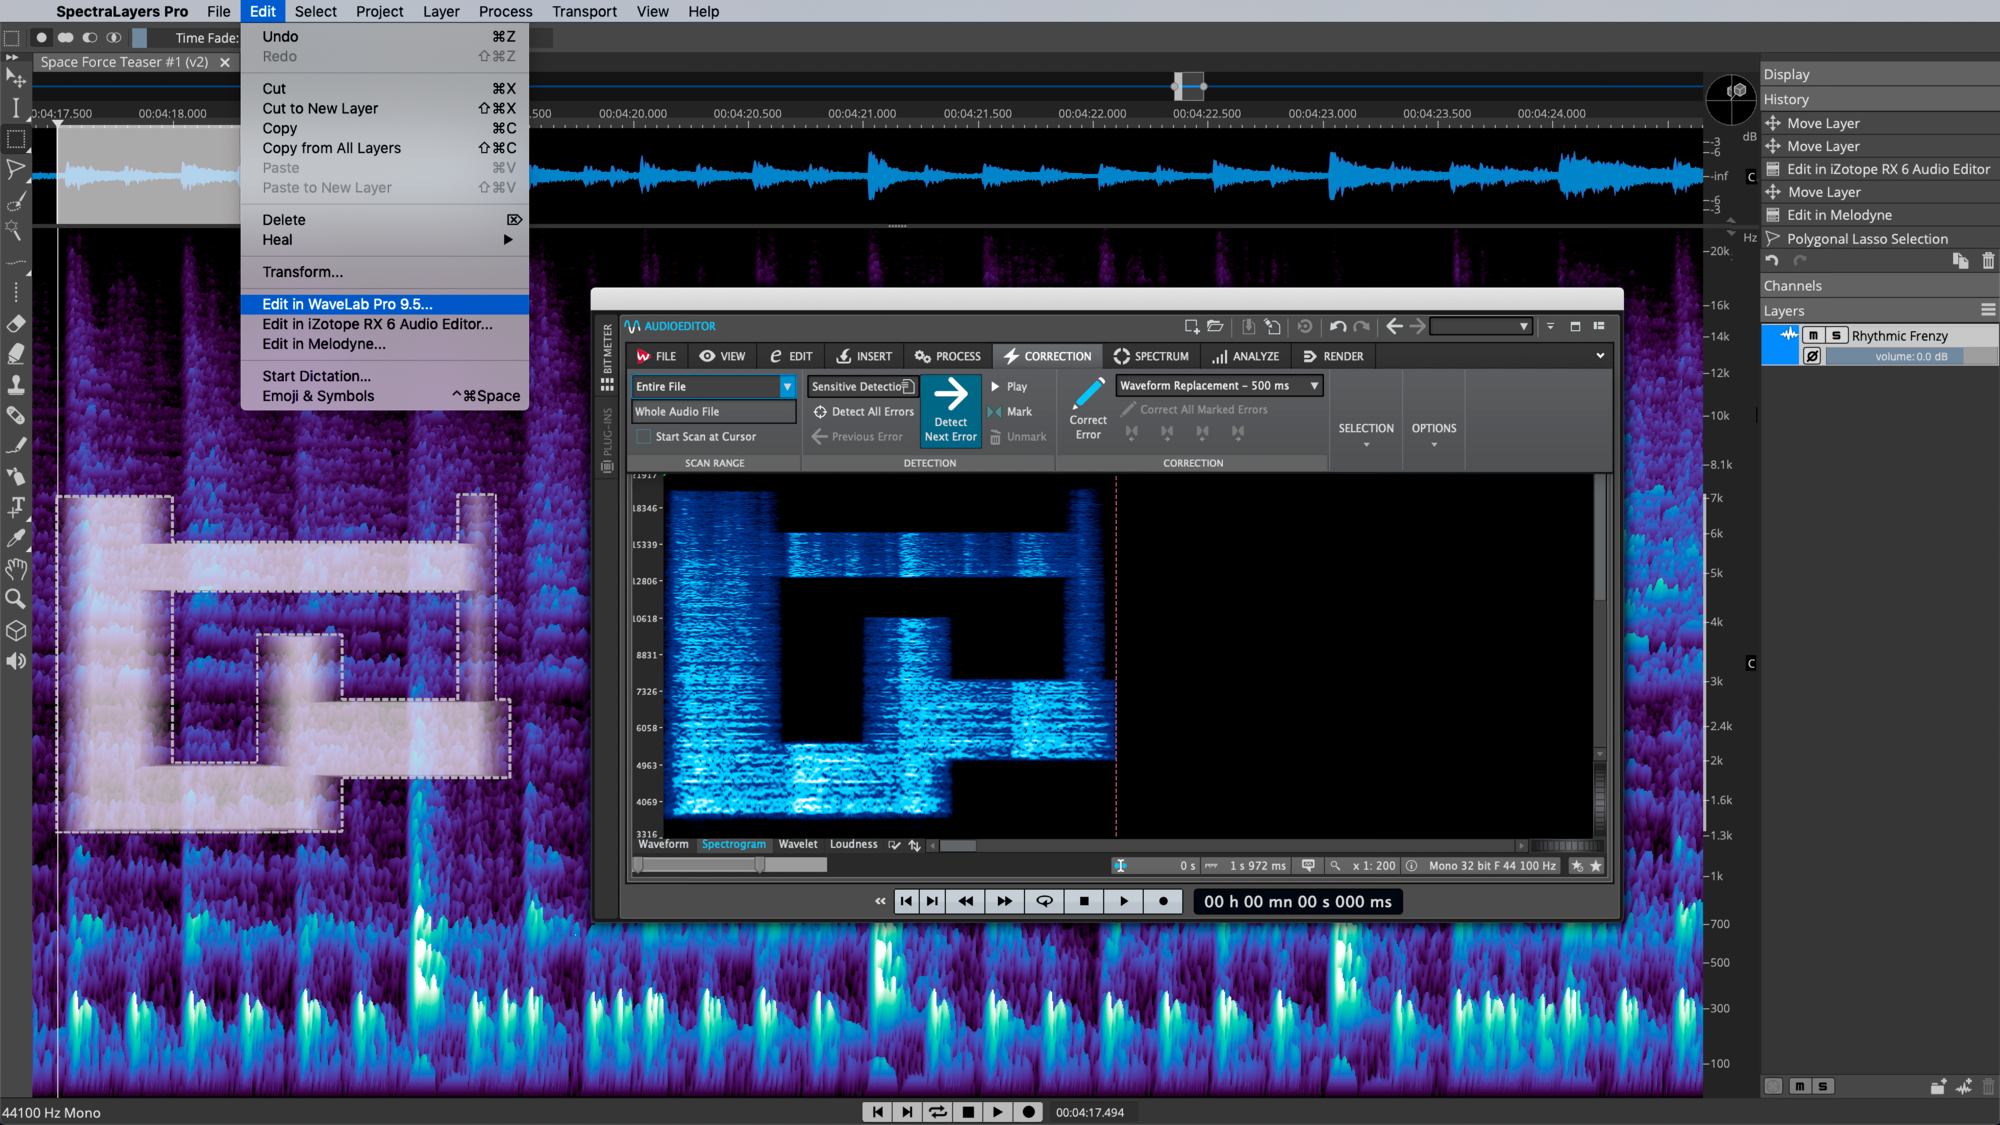 instal the new for ios MAGIX / Steinberg SpectraLayers Pro 10.0.0.327